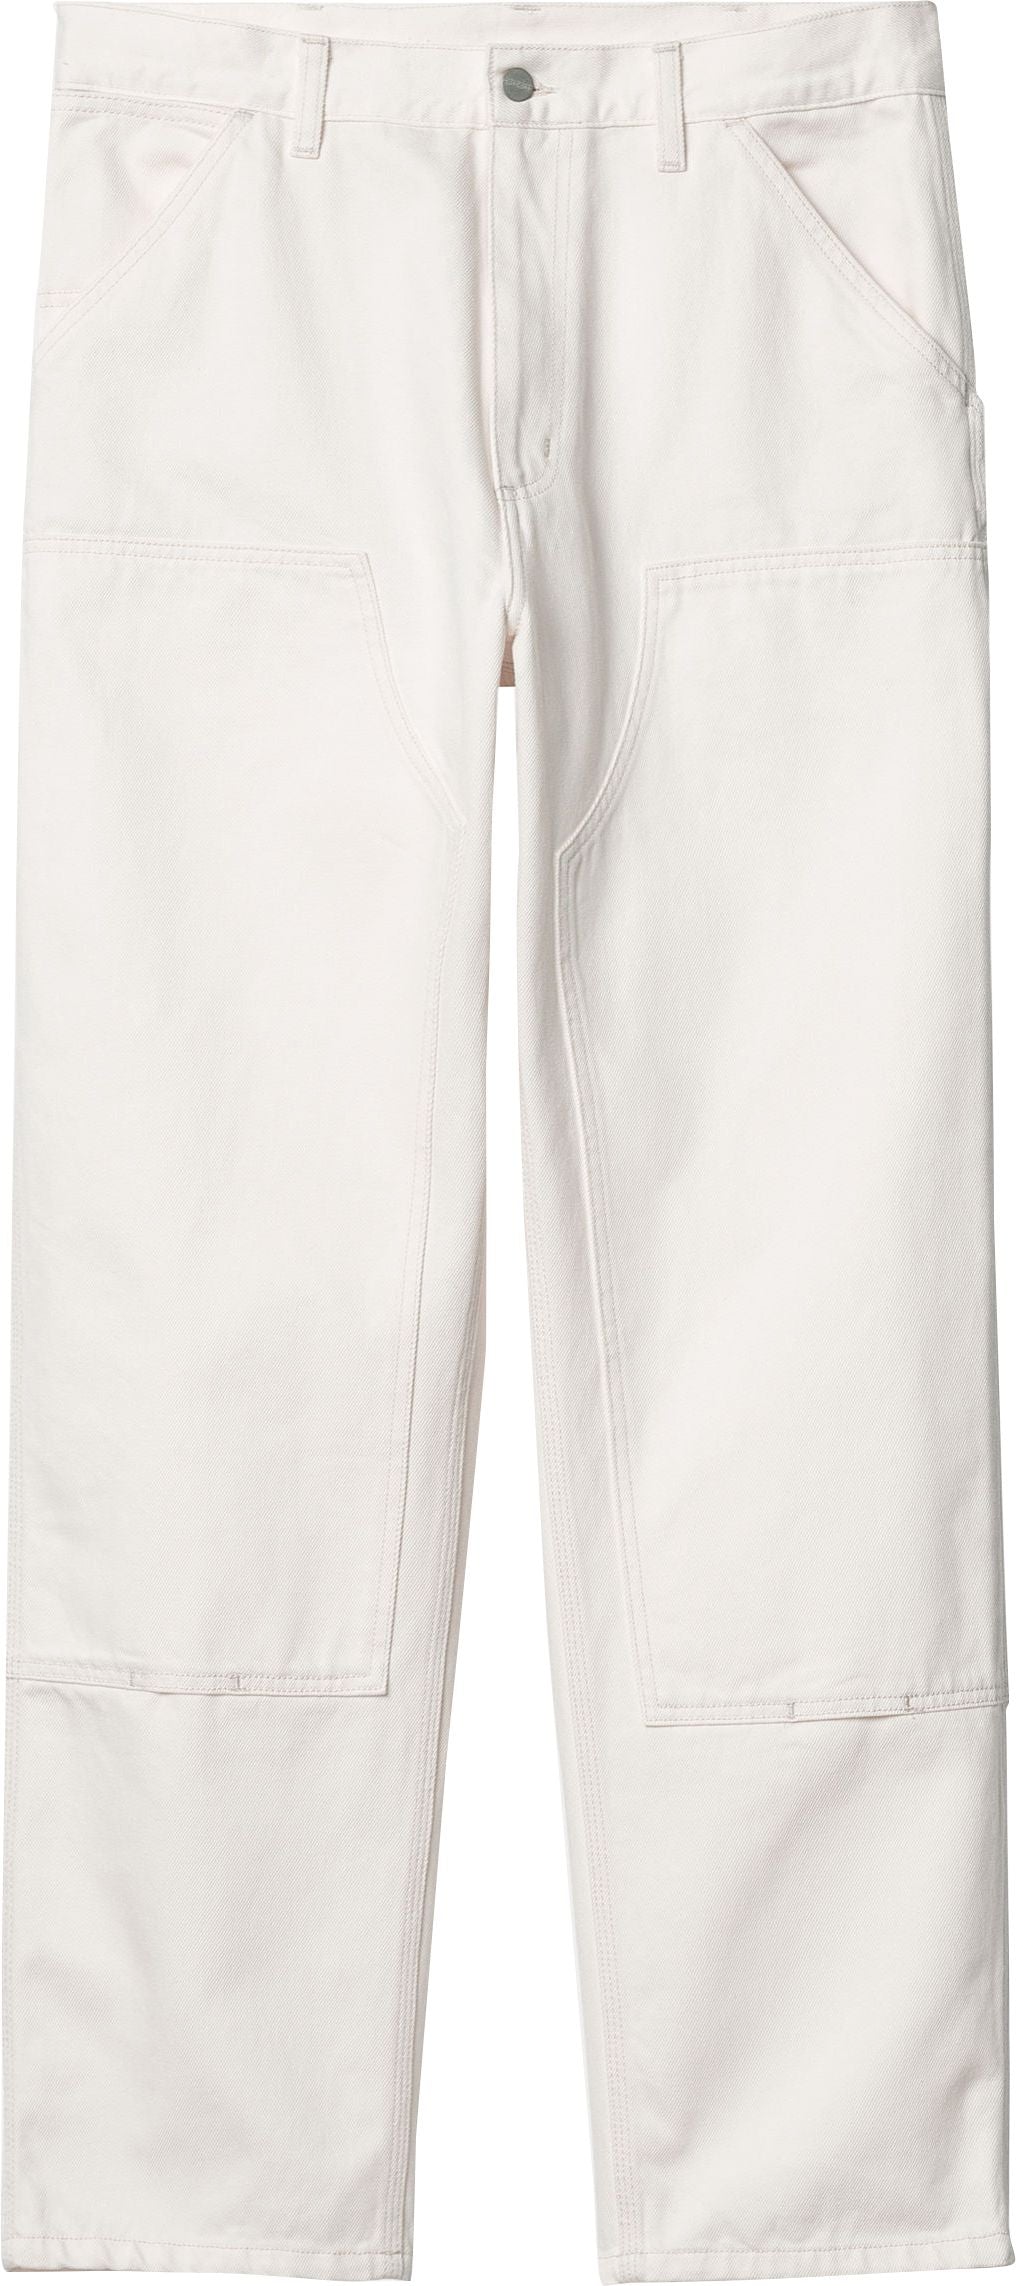  Carhartt Wip Jeans Double Knee Pant White Rinsed Bianco Uomo - 1